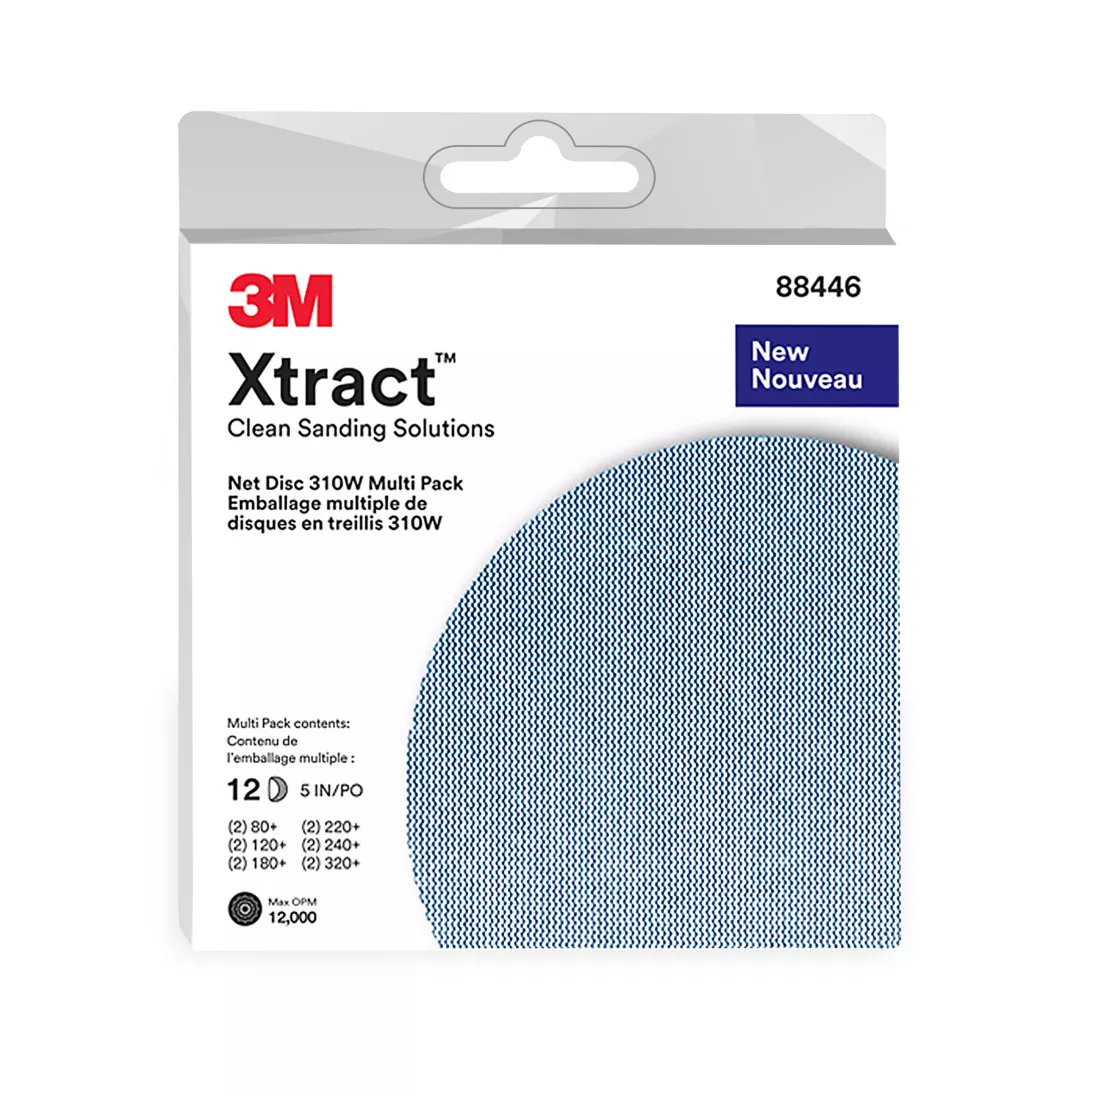 3M Xtract™ Net Disc 310W, 5 in x NH, 80+, 120+, 180+, 220+, 240+, 320+,
Multi-pack, 20 Packs/Case